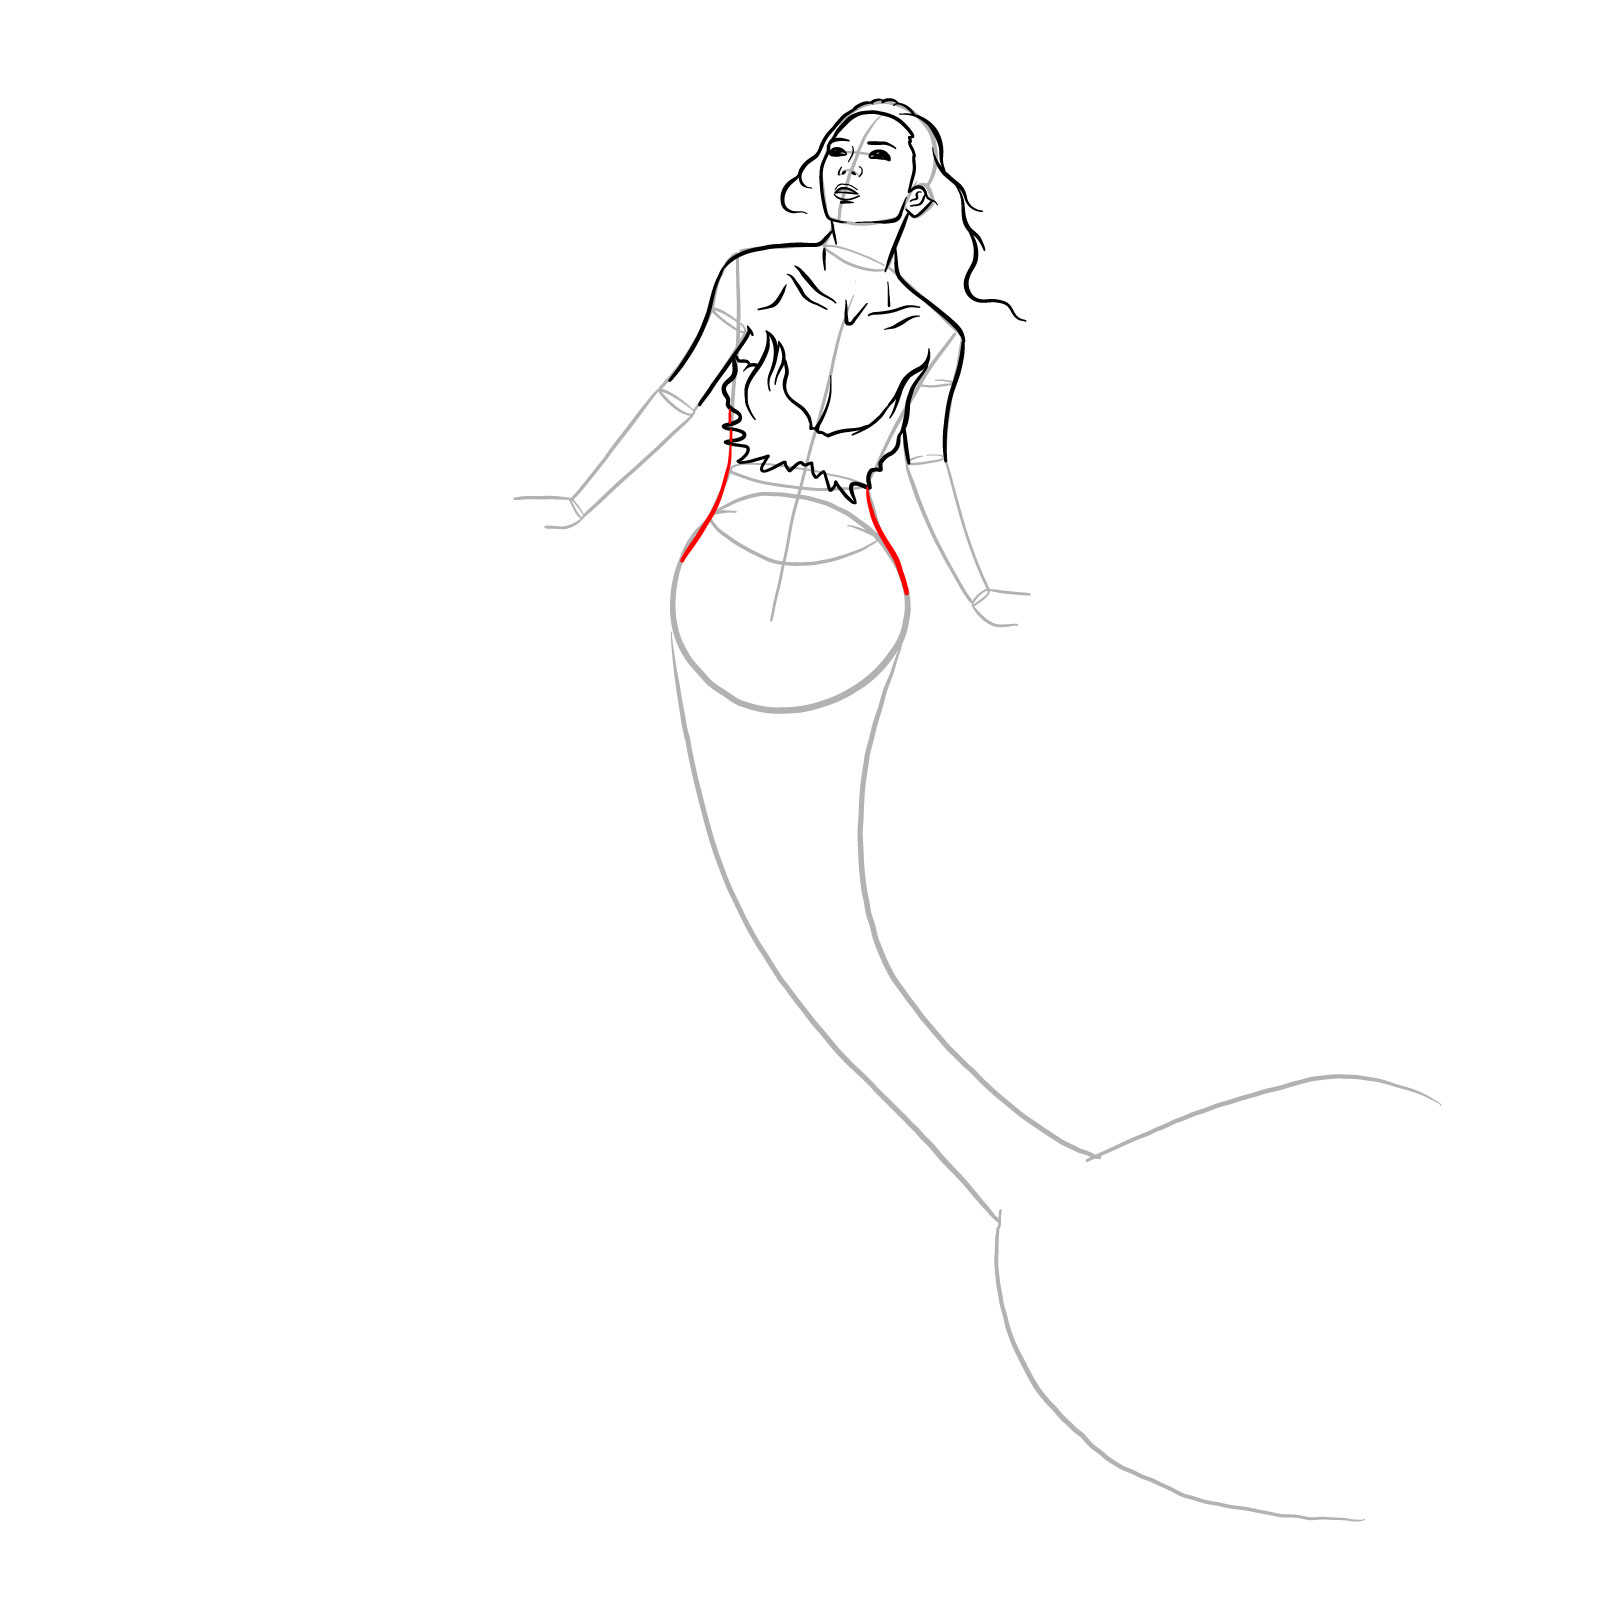 How to draw a Mermaid - step 14